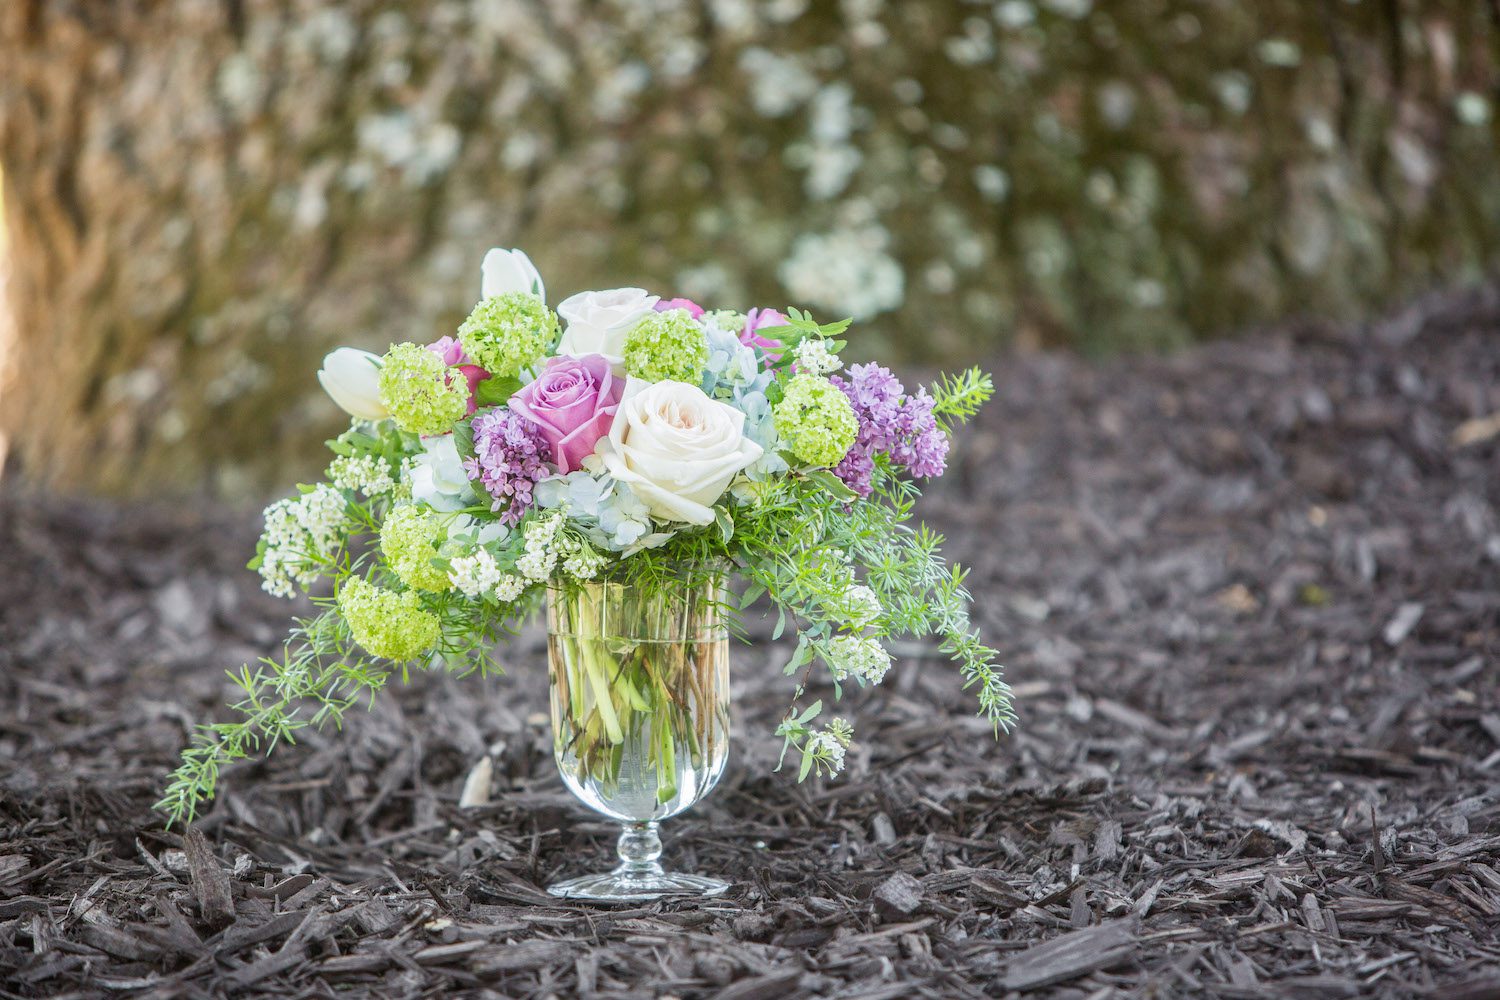 "Collette" with Viburnum, Lilac, Spirea, Tulips and Roses